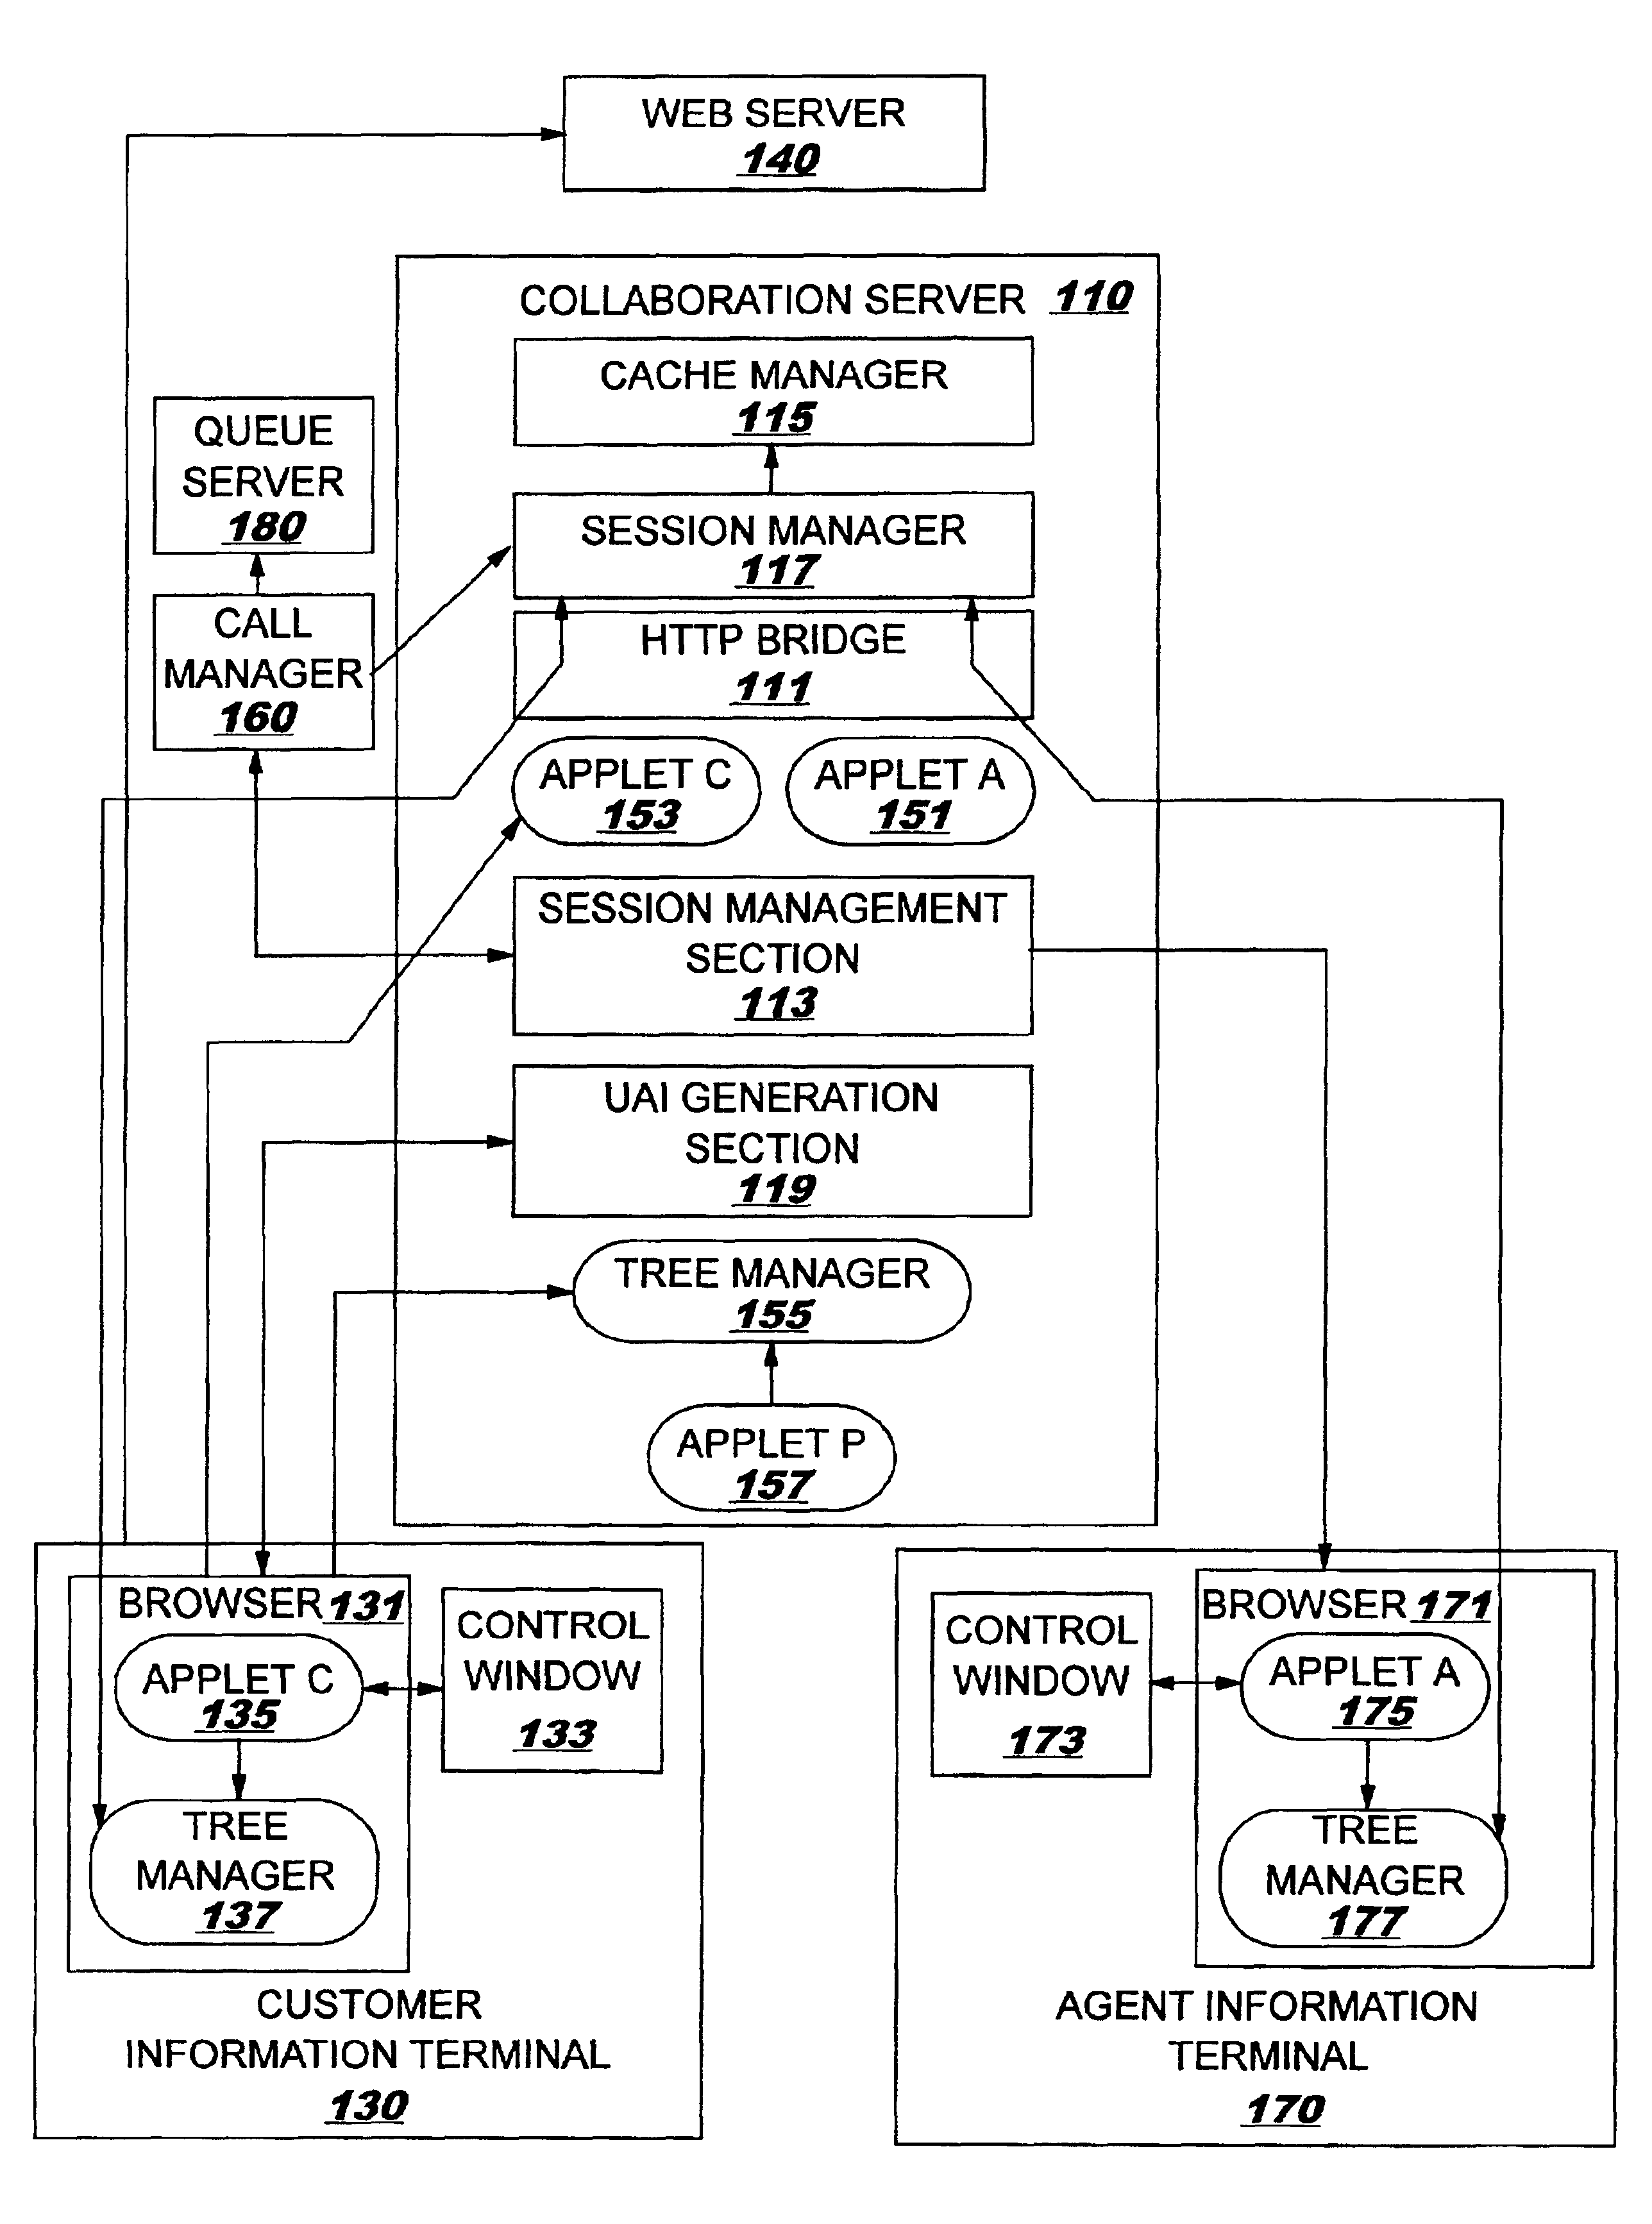 Method for acquiring content information, and software product, collaboration system and collaboration server for acquiring content information